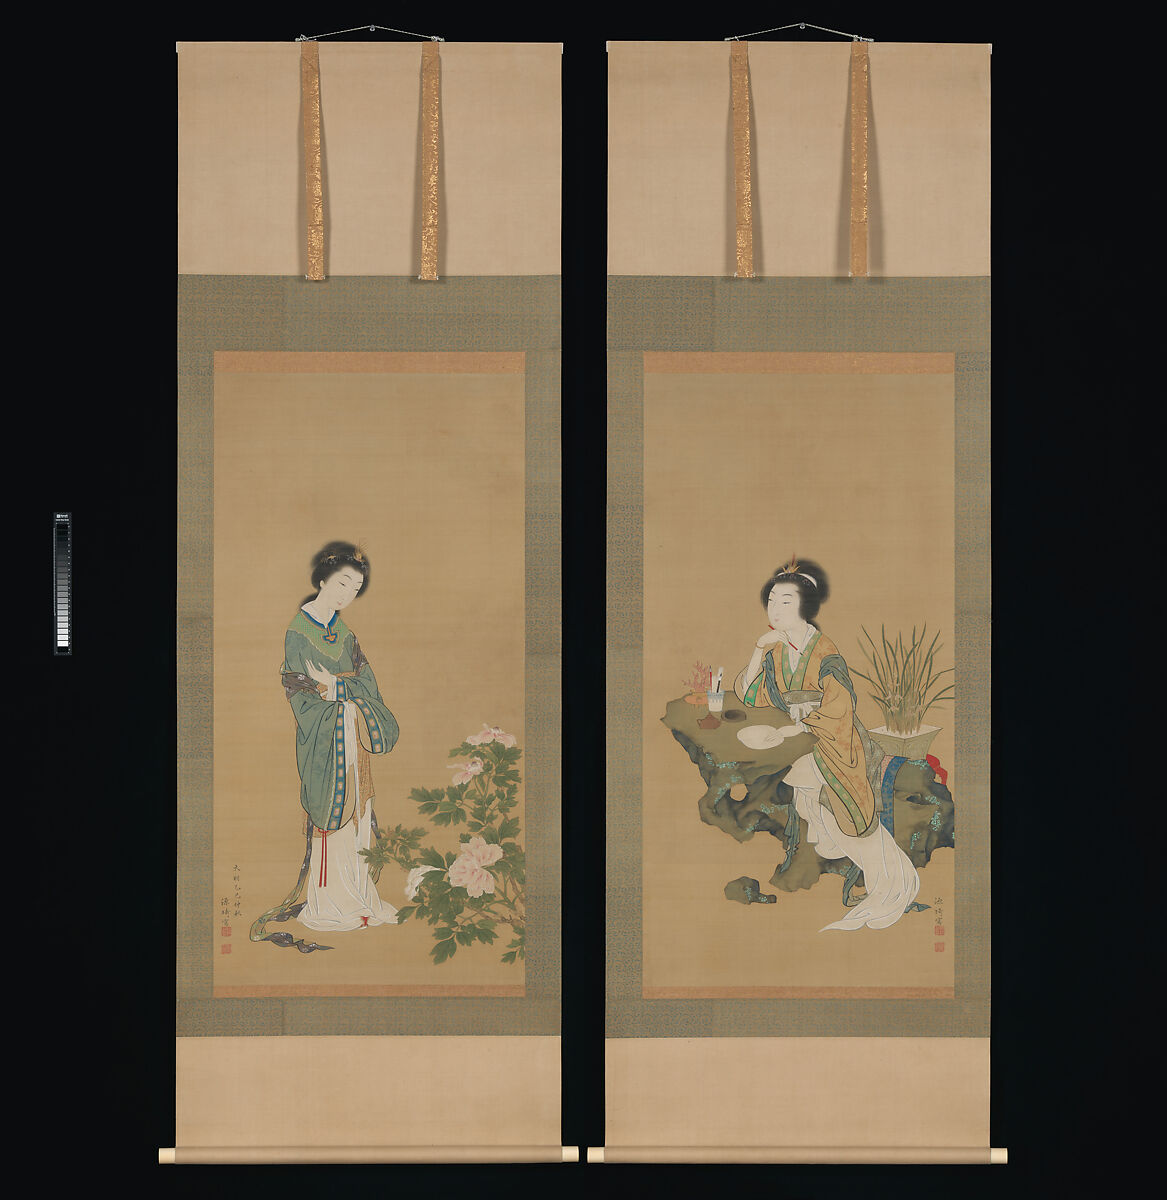 Yanji with Orchids and Yang Guifei with Peonies, Genki (Komai Ki) (Japanese, 1747–1797), Pair of hanging scrolls; ink and color on silk, Japan 